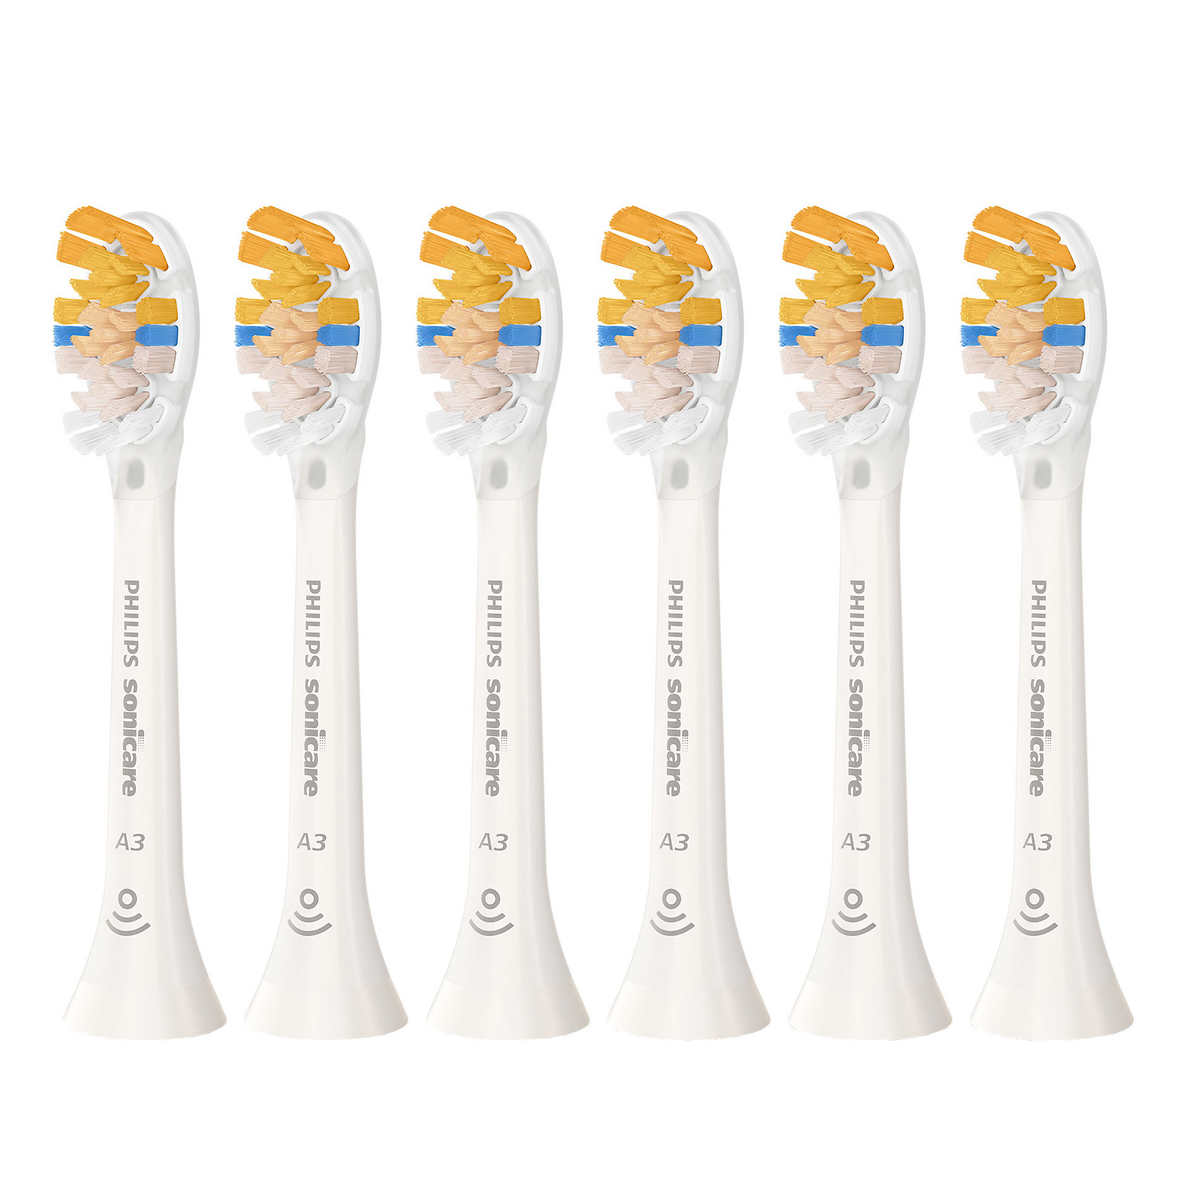 Philips Sonicare A3 All-in-One Brush Head, 6-count